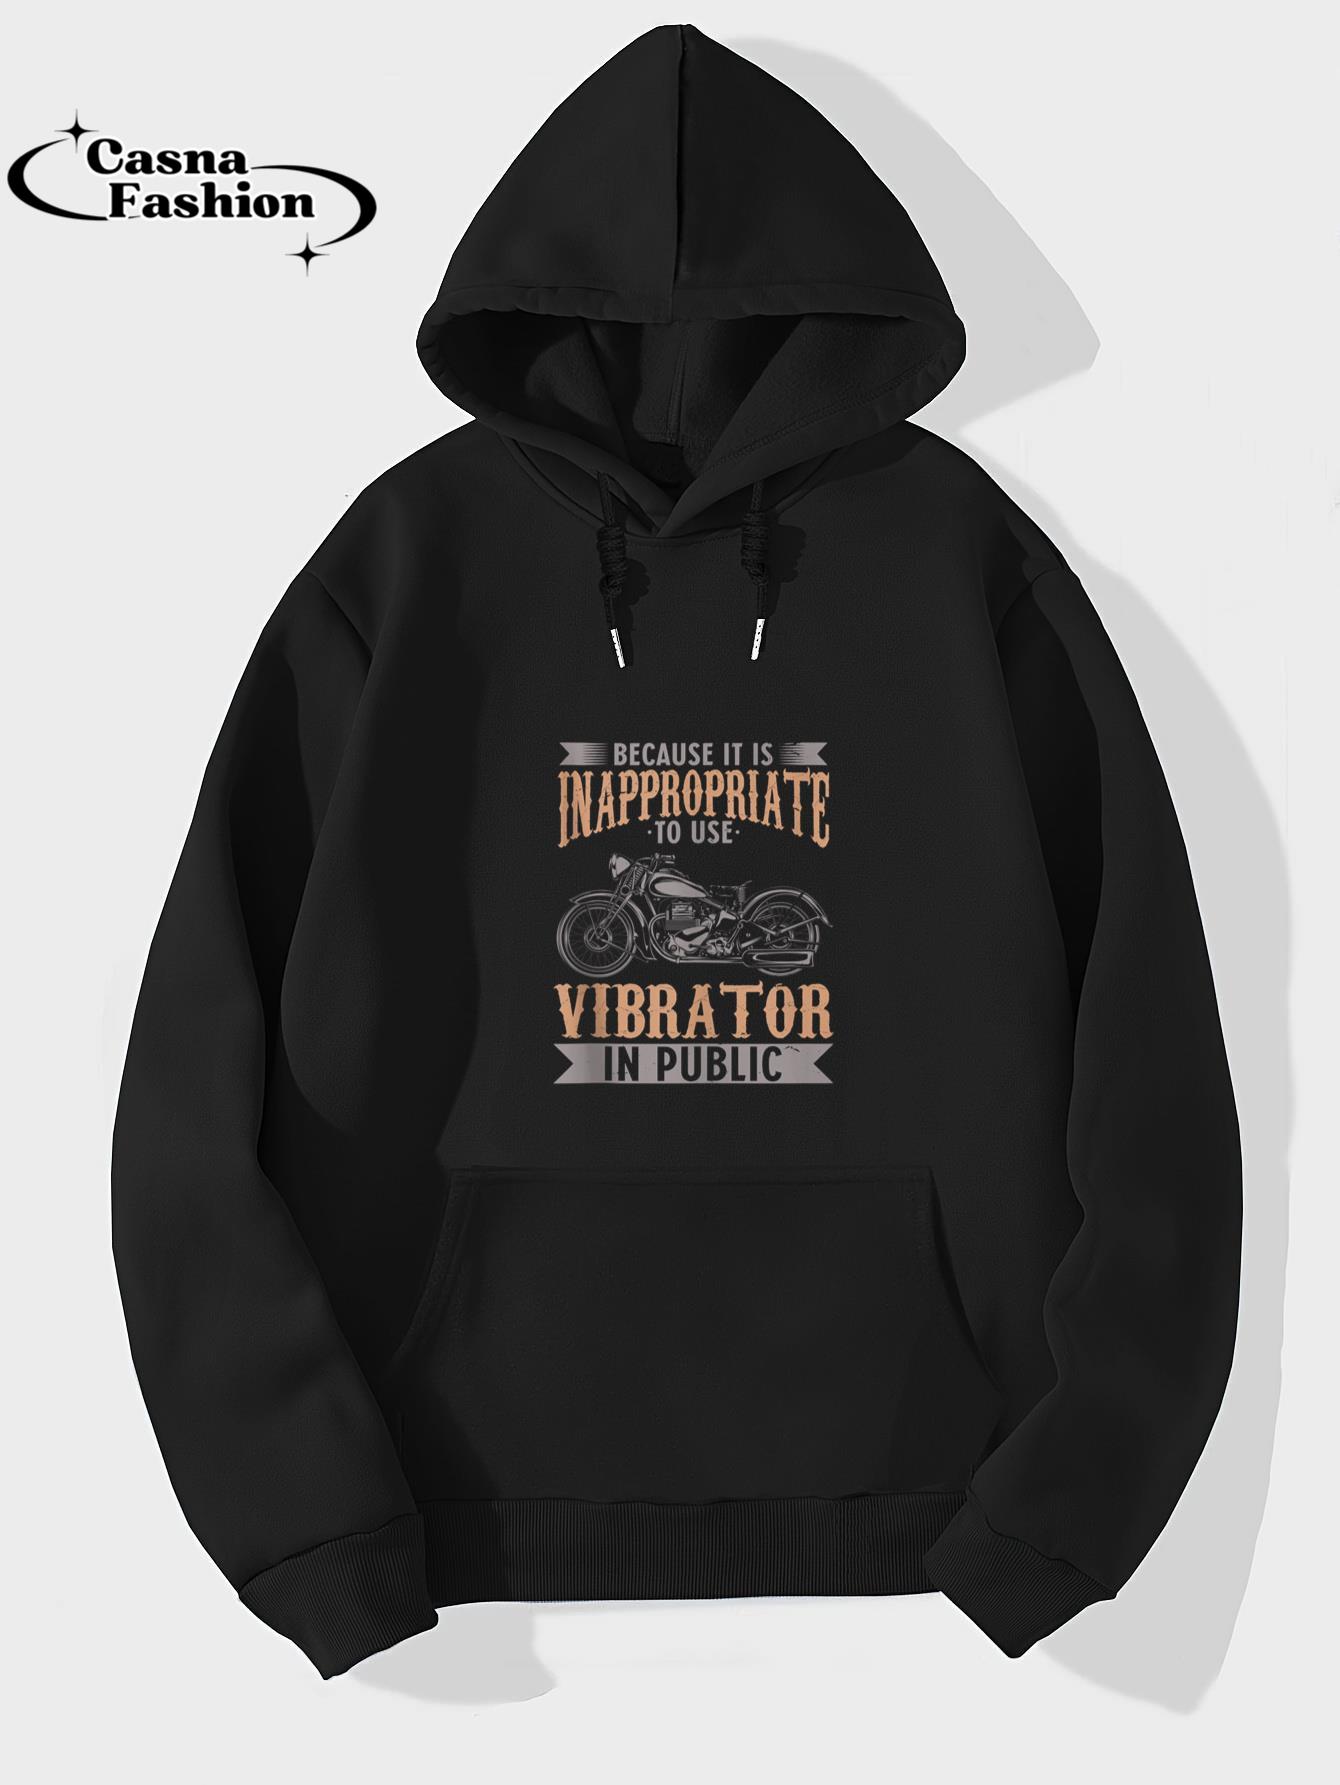 casnafashion_Hoodie_Because It Is Inappropriate To Use Vibrator In Public Biker Tank Top_hoodie_black hoodie